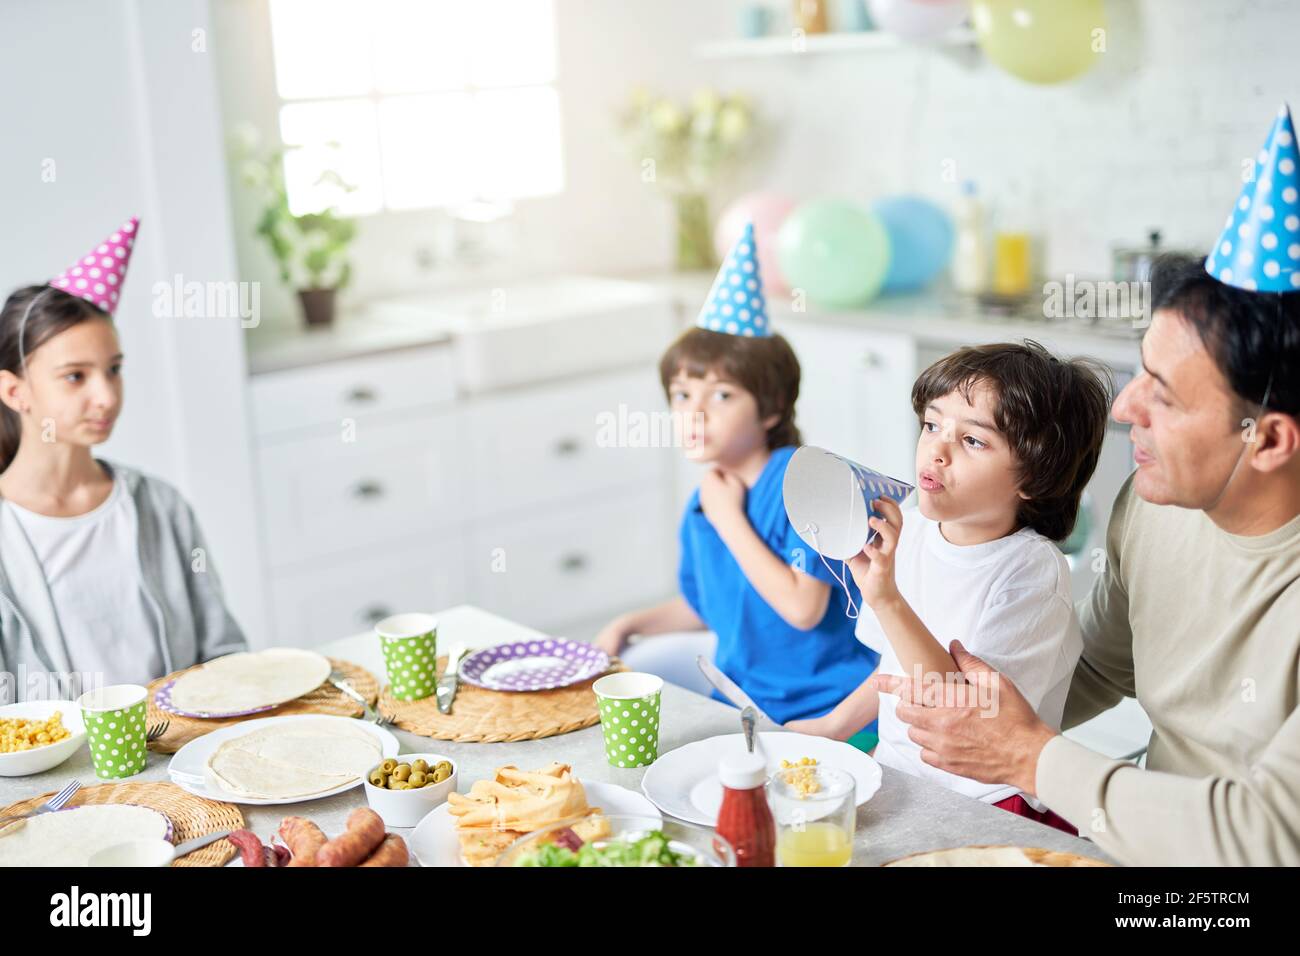 Carefree athmosphere. Joyful little boy playing with his birthday cap. Hispanic family having dinner while celebrating birthday together at home Stock Photo